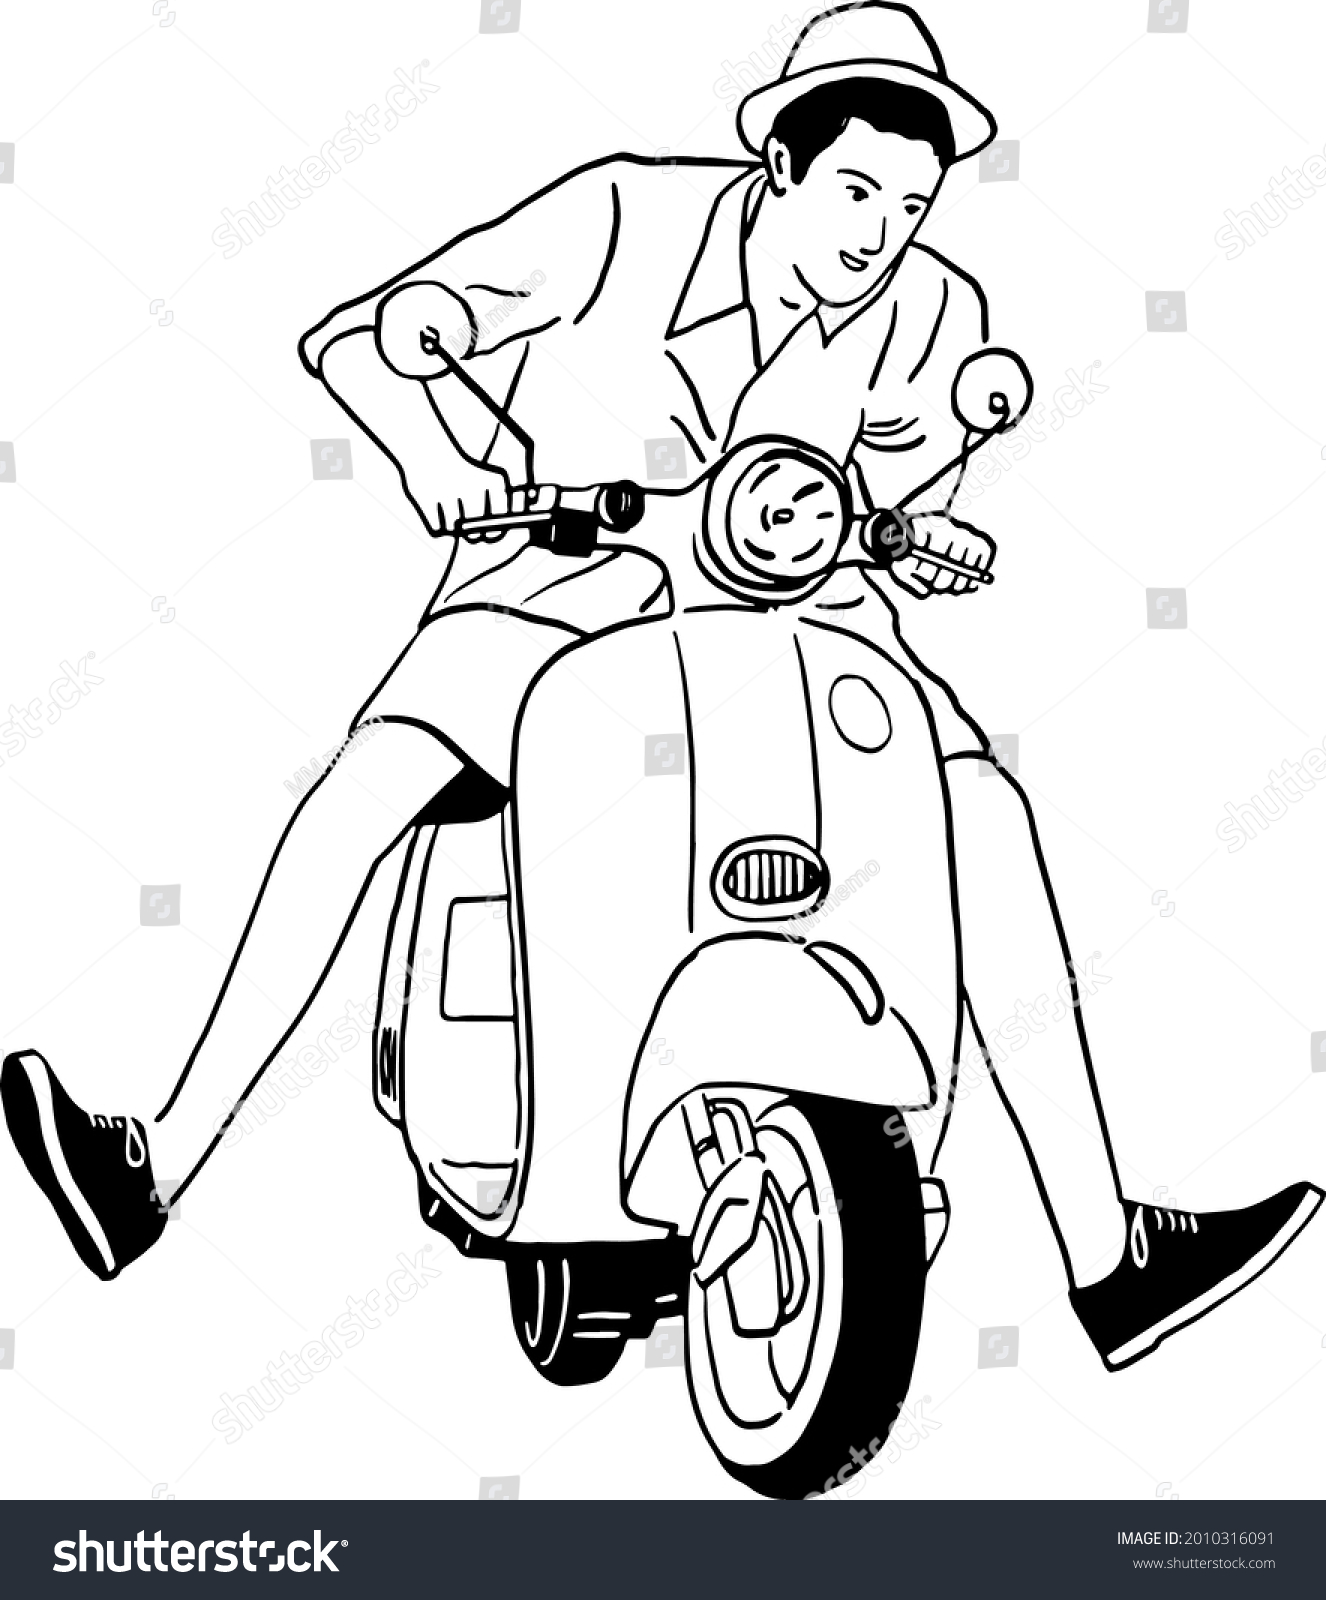 2338 Riding Vespa Stock Illustrations Images And Vectors Shutterstock